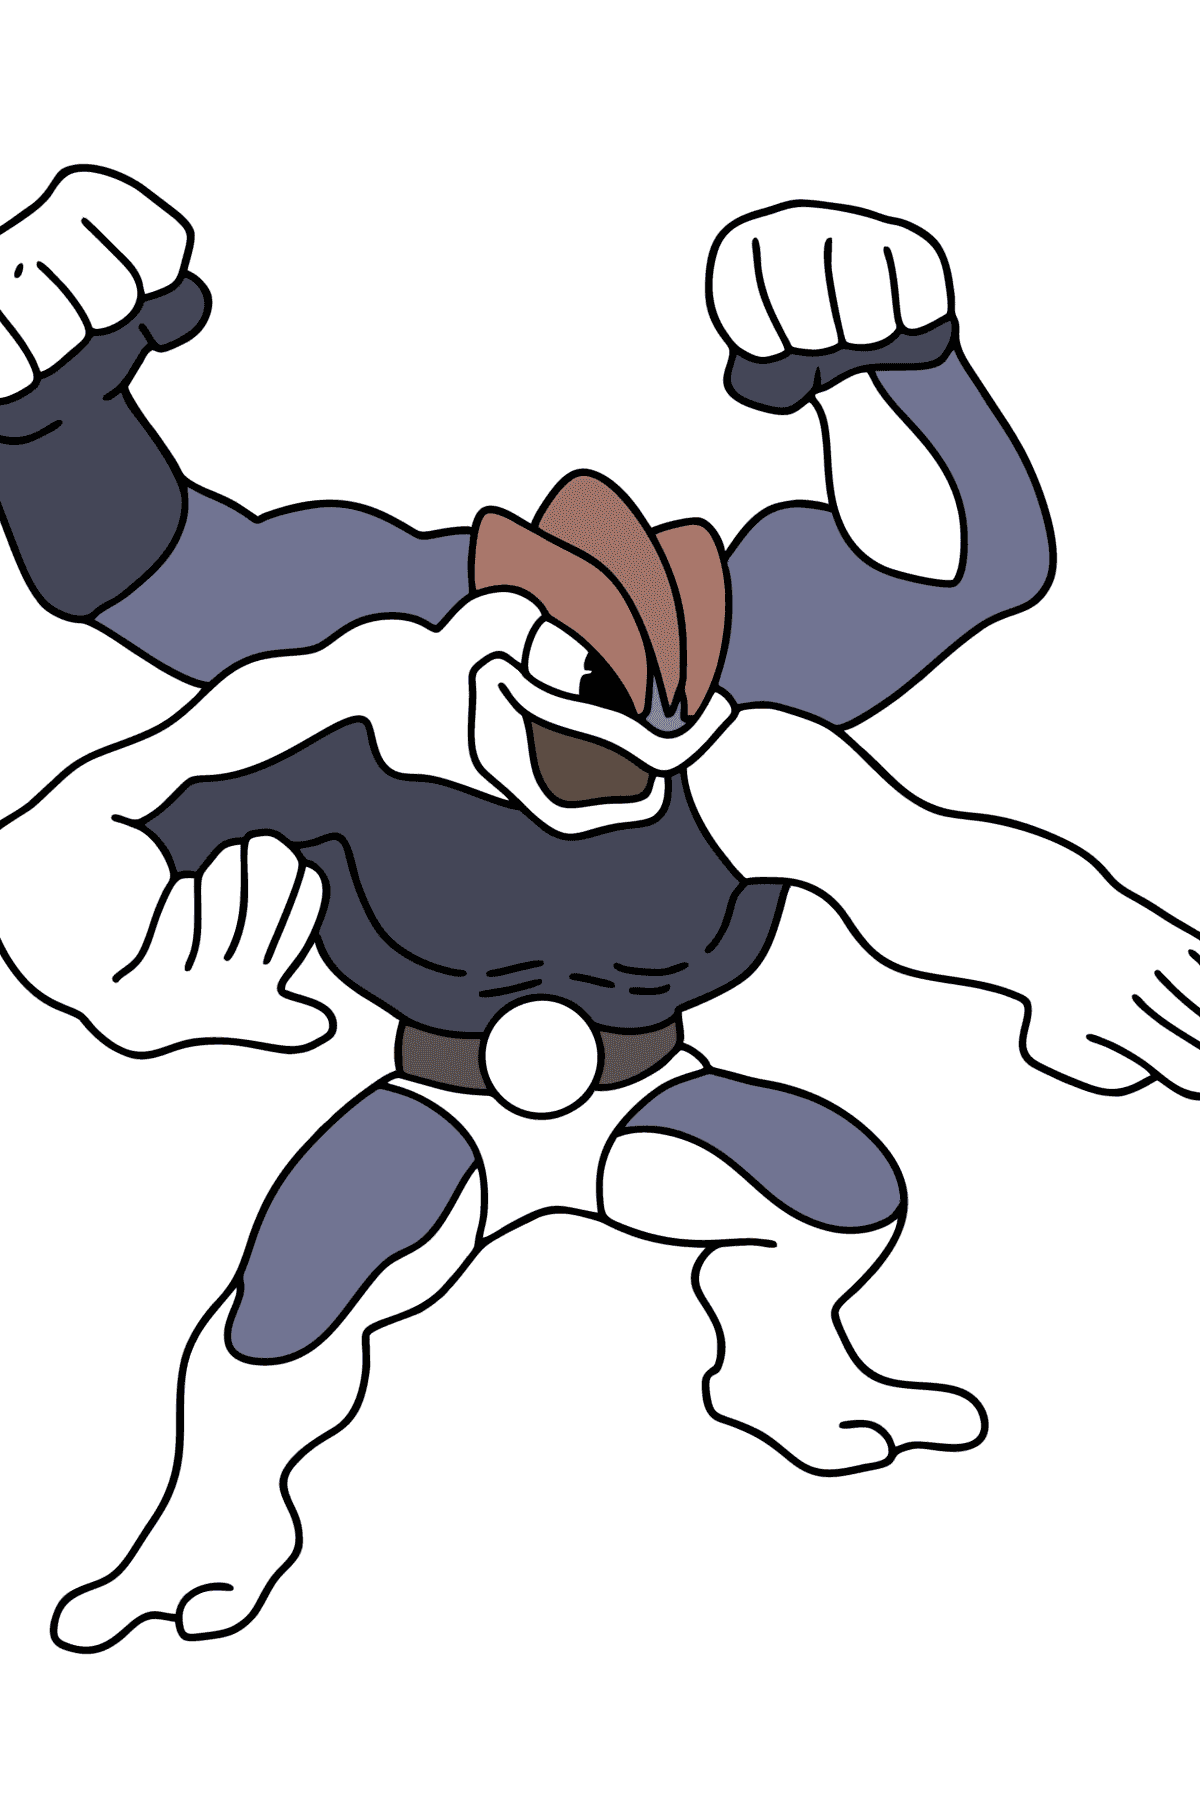 Coloring page Pokemon Go Machamp - Coloring Pages for Kids